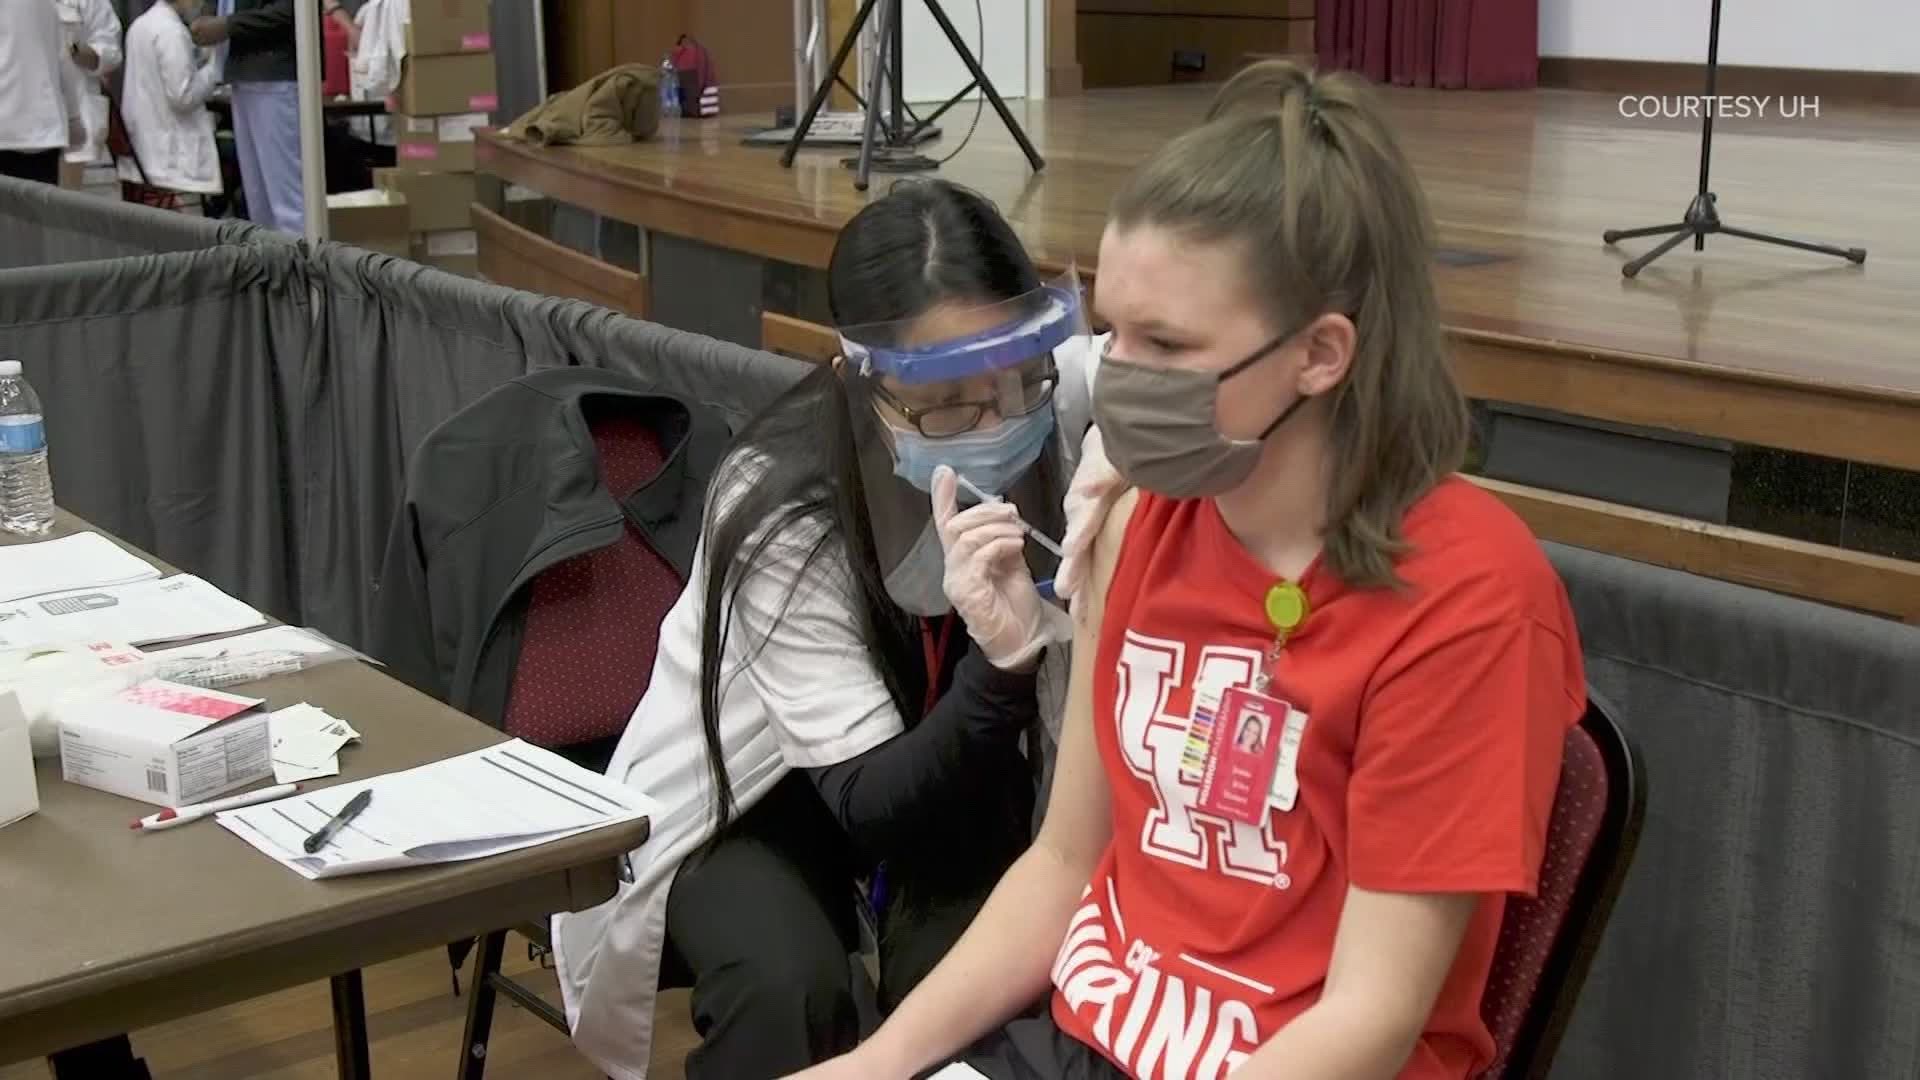 The University of Houston is vaccinating 1,000 students and staff Wednesday and Thursday.